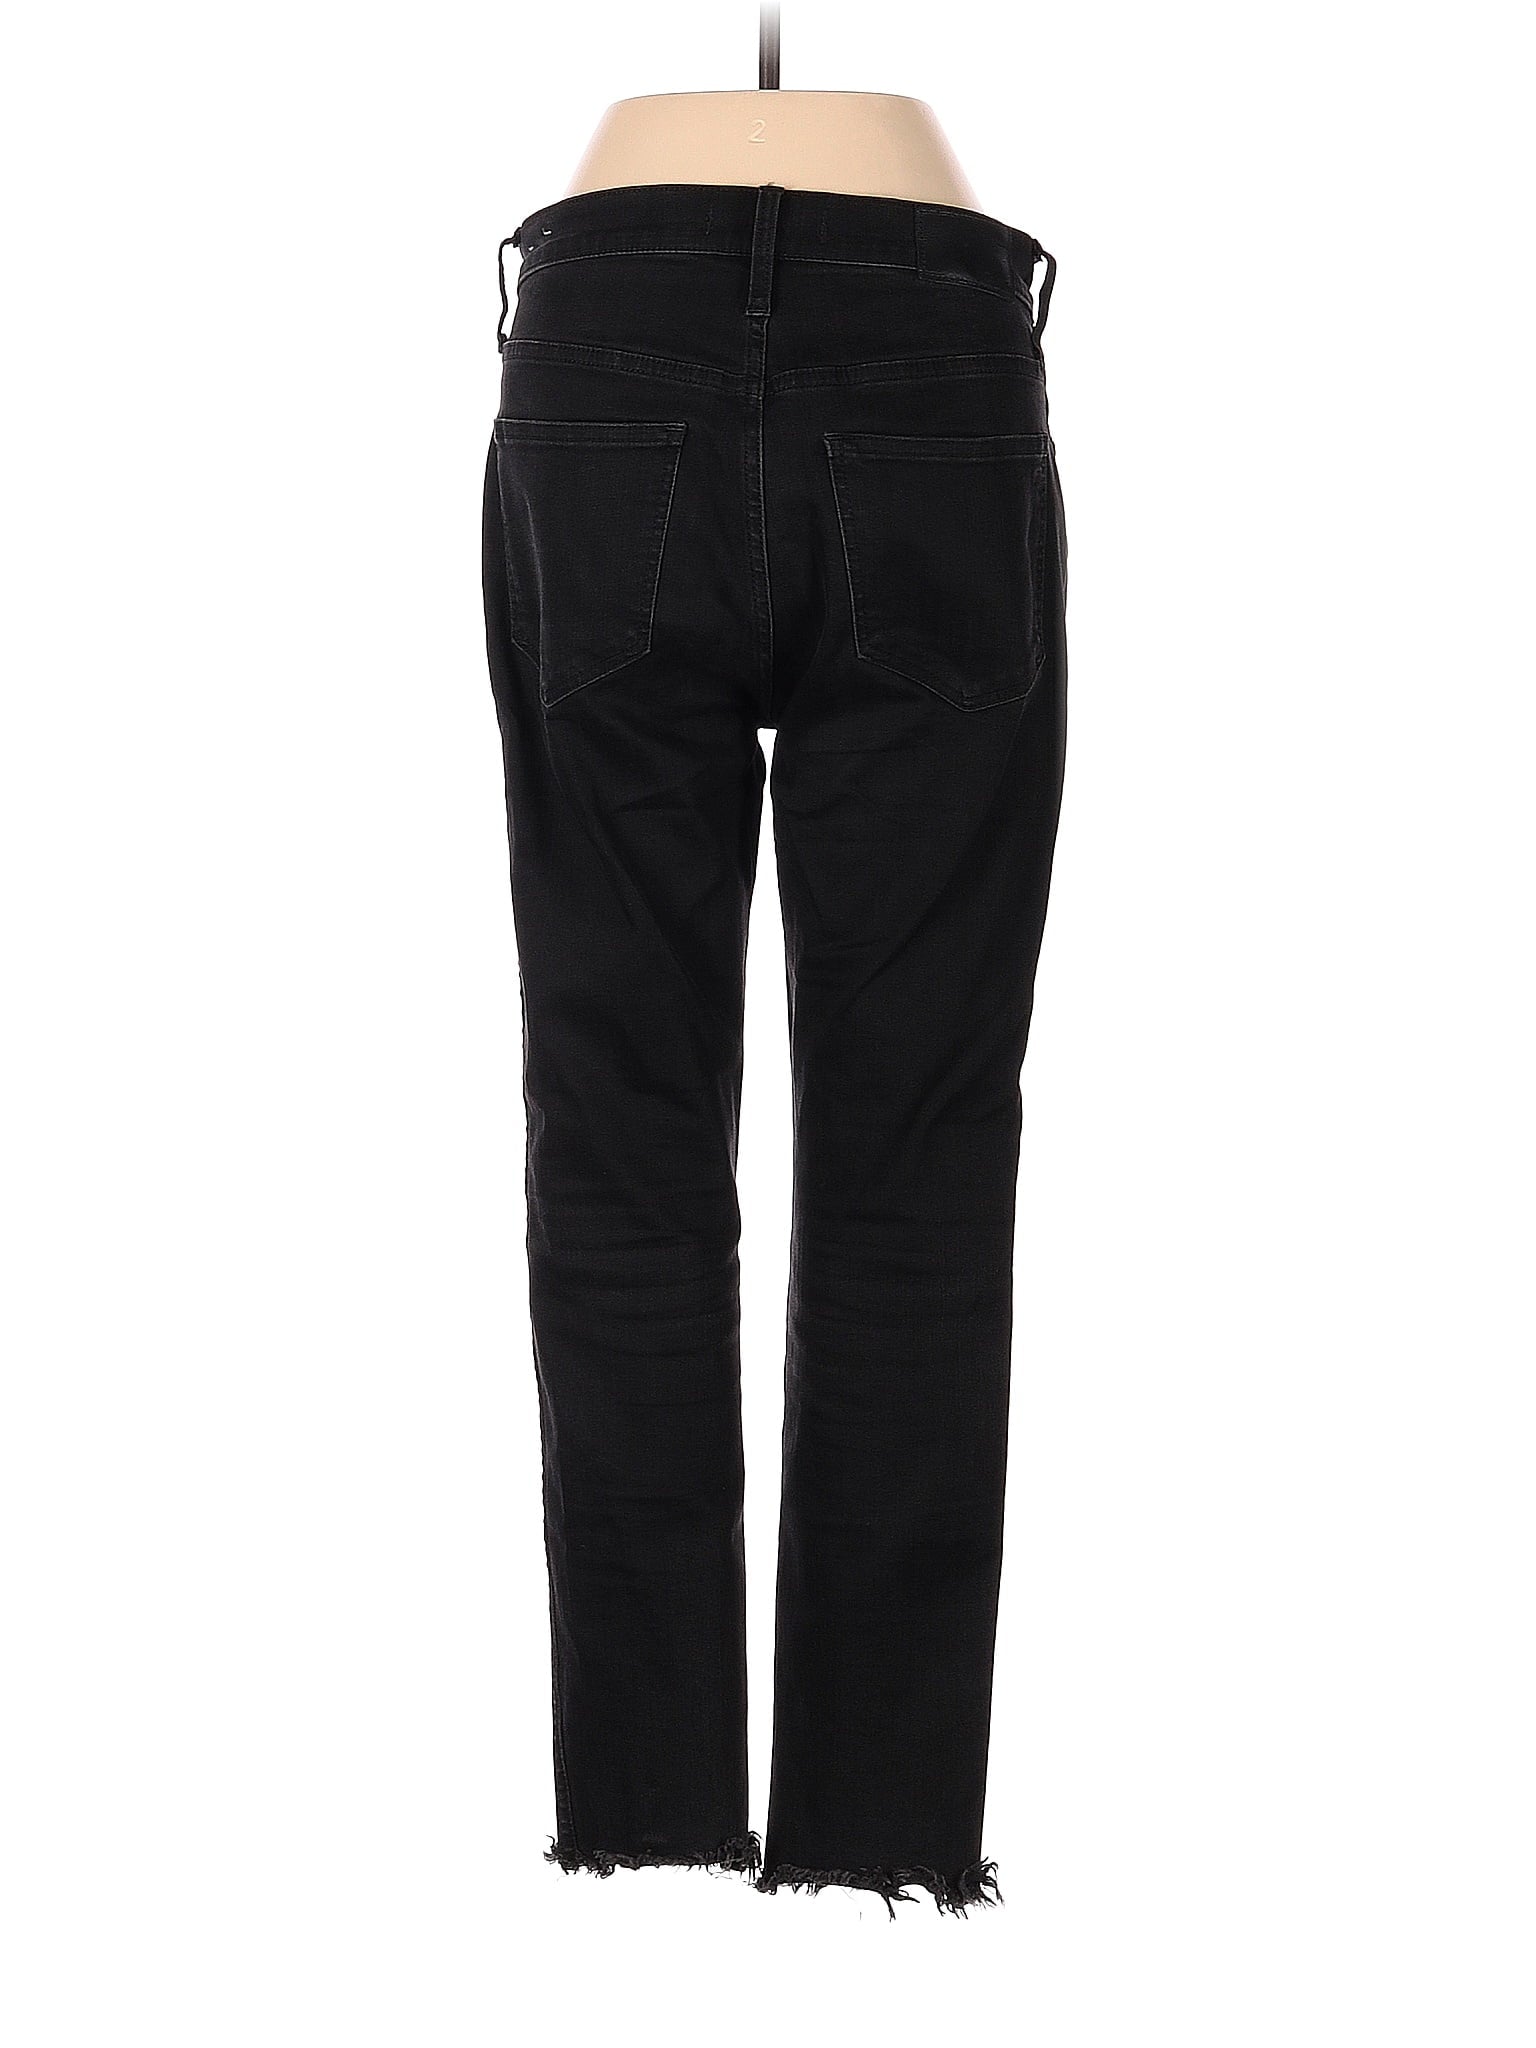 High-Rise Petite 10" High-Rise Skinny Jeans In Berkeley Black: Button-Through Edition waist size - 27 P